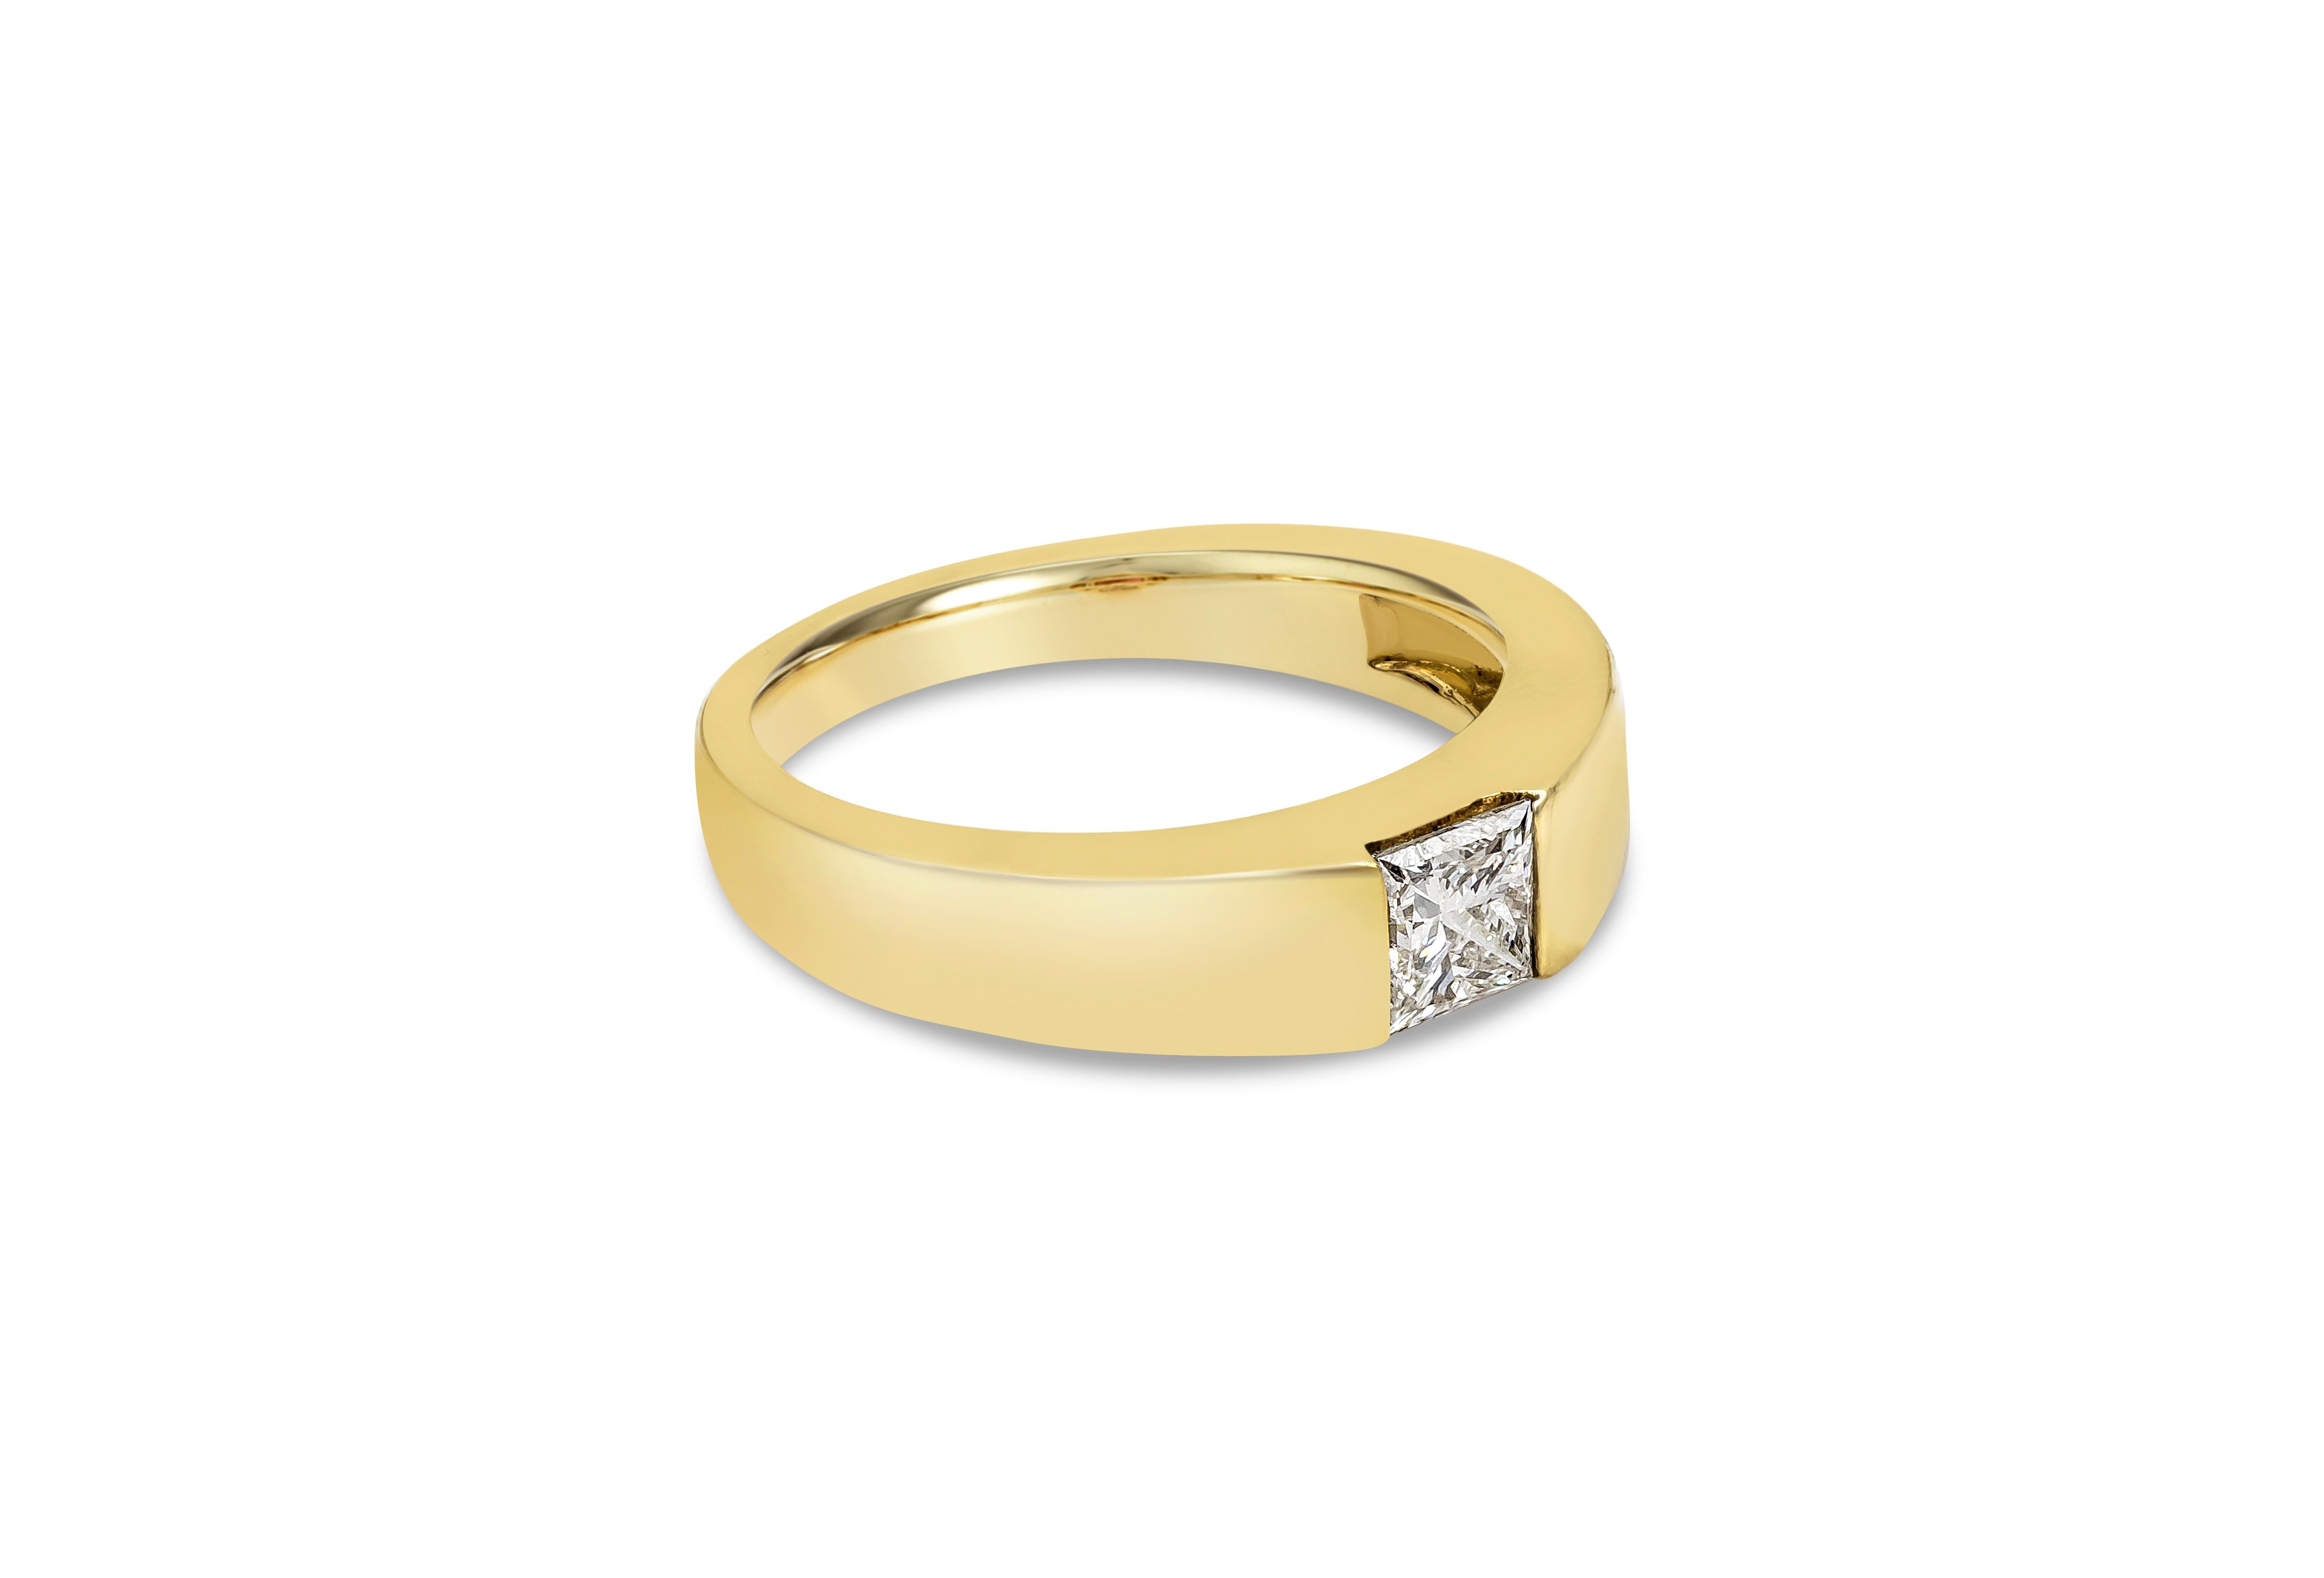 Showcases a 0.70 carats princess cut diamond certified by GIA as I color, VS2 in clarity, set in a semi-bezel setting. Finely made in 14K yellow gold and Size 8.25 US resizable upon request.

Roman Malakov is a custom house, specializing in creating